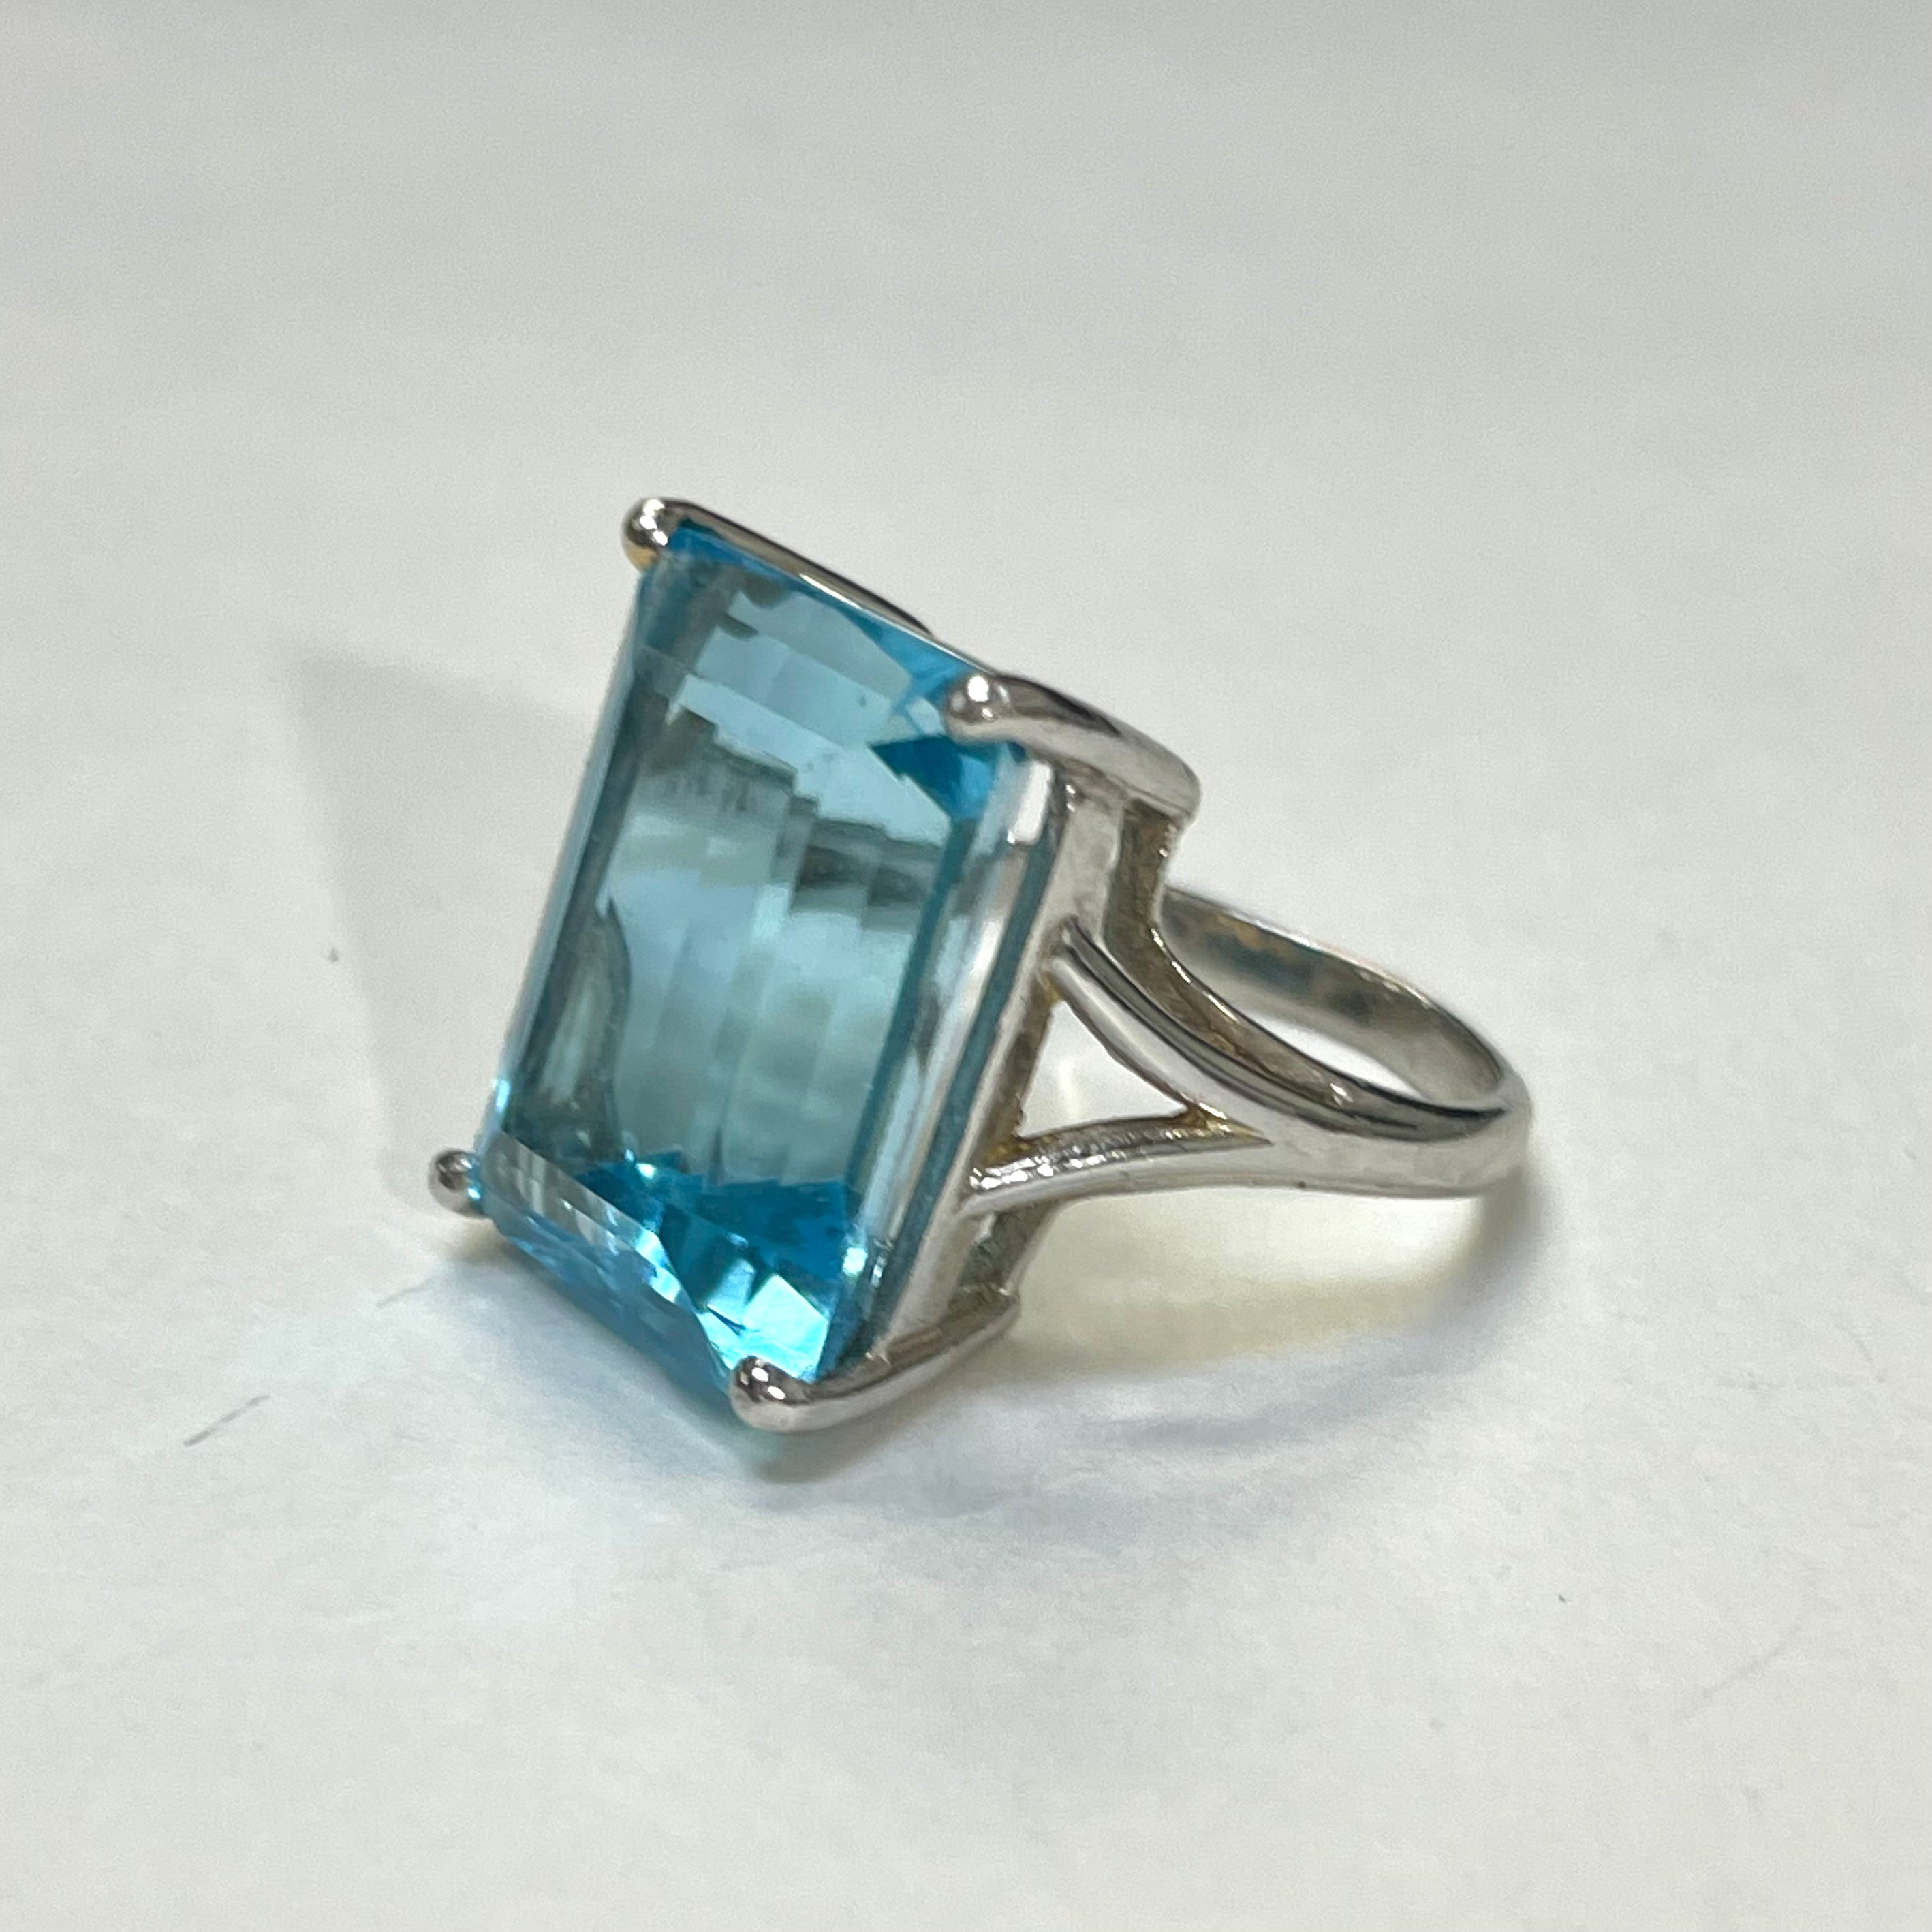 Blue Topaz Ring in Solid 14k White Gold Size 4.75